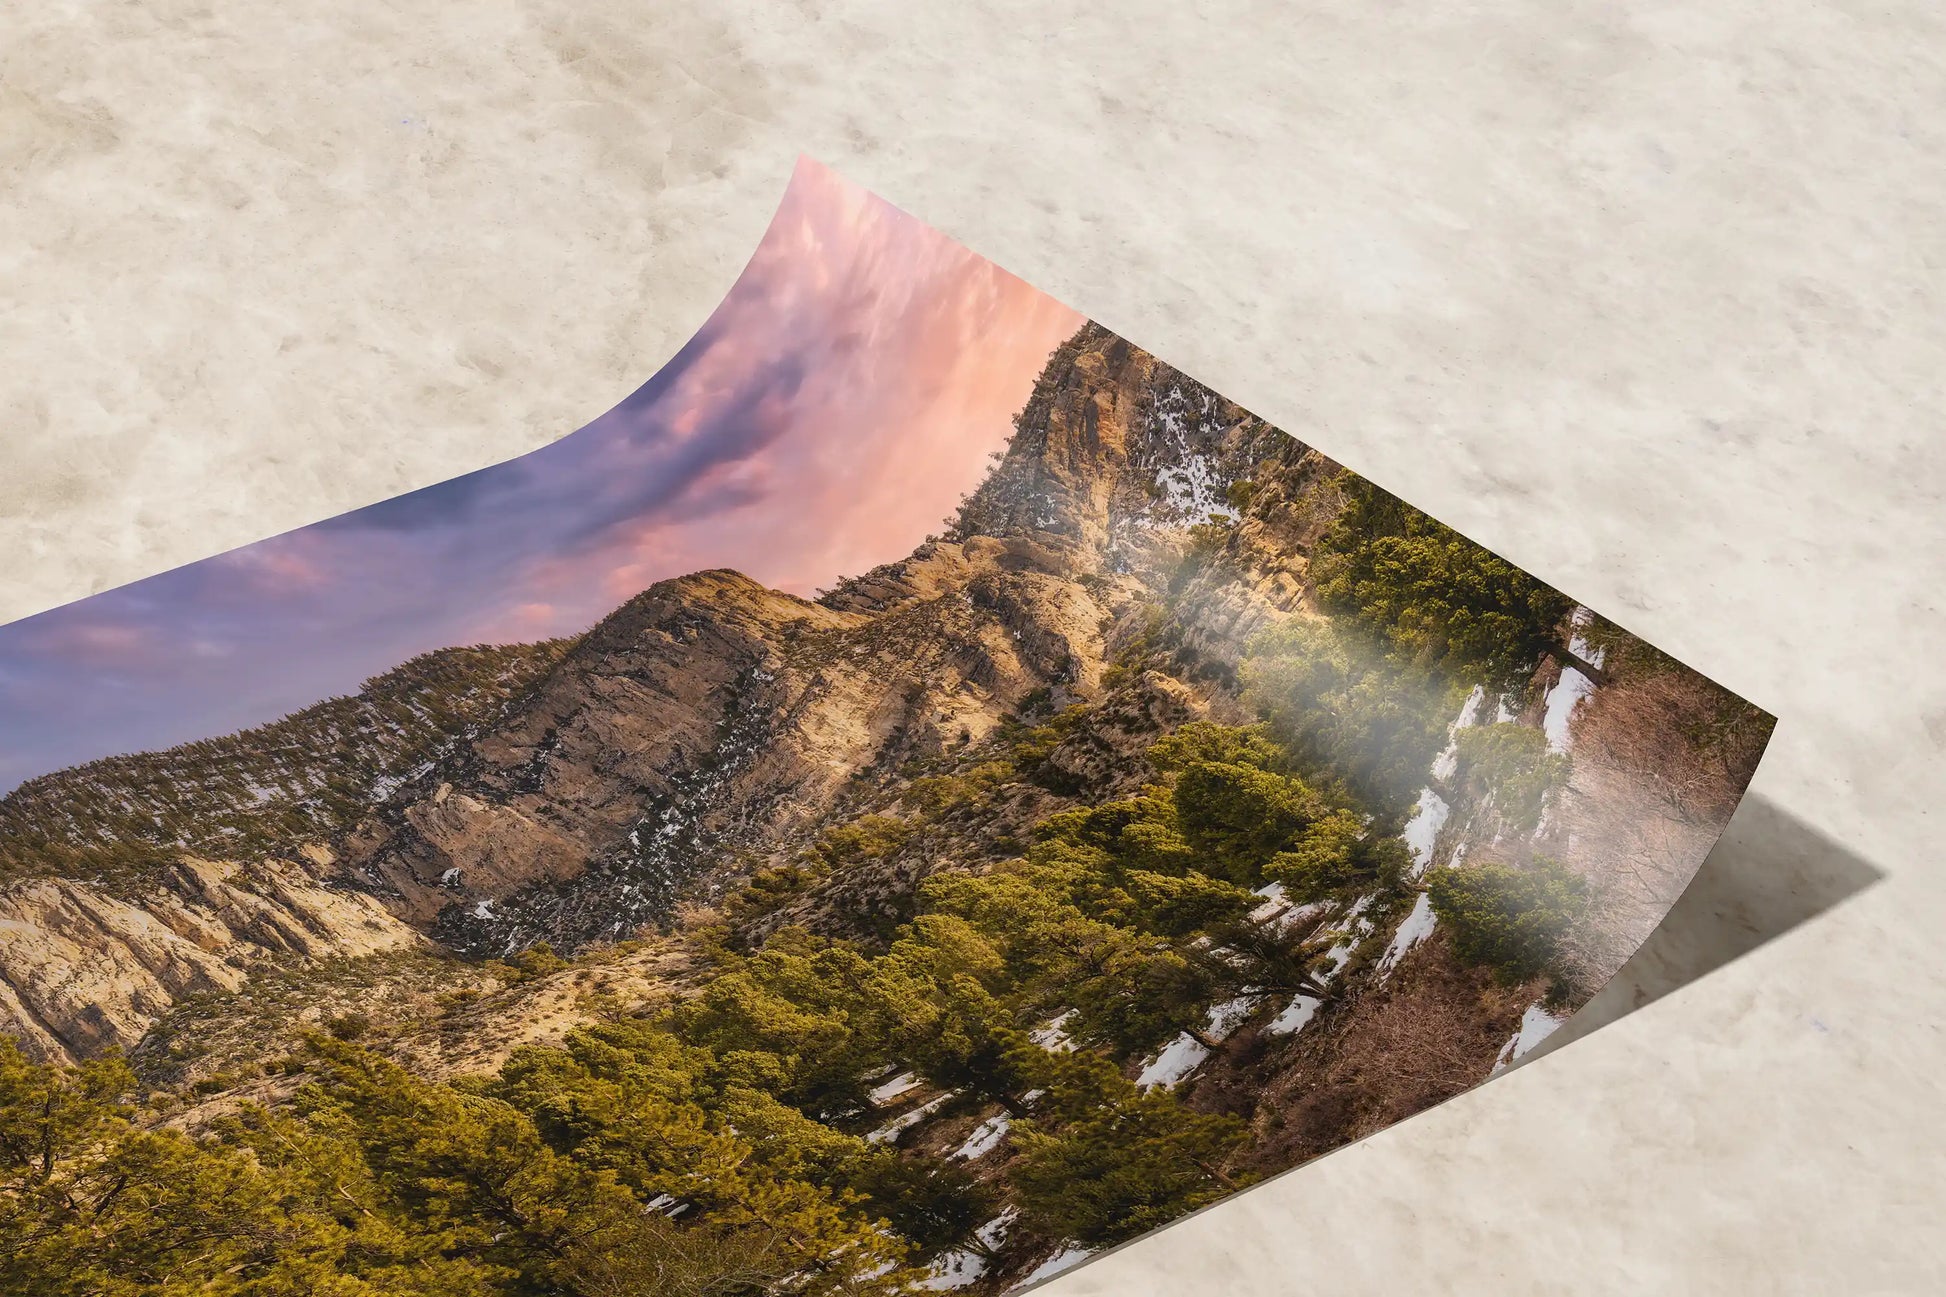 Close-up of a paper print detailing the lush textures of Fletcher Peak at Mt Charleston, highlighting the artwork's vibrant, life-like quality and sustainable materials.